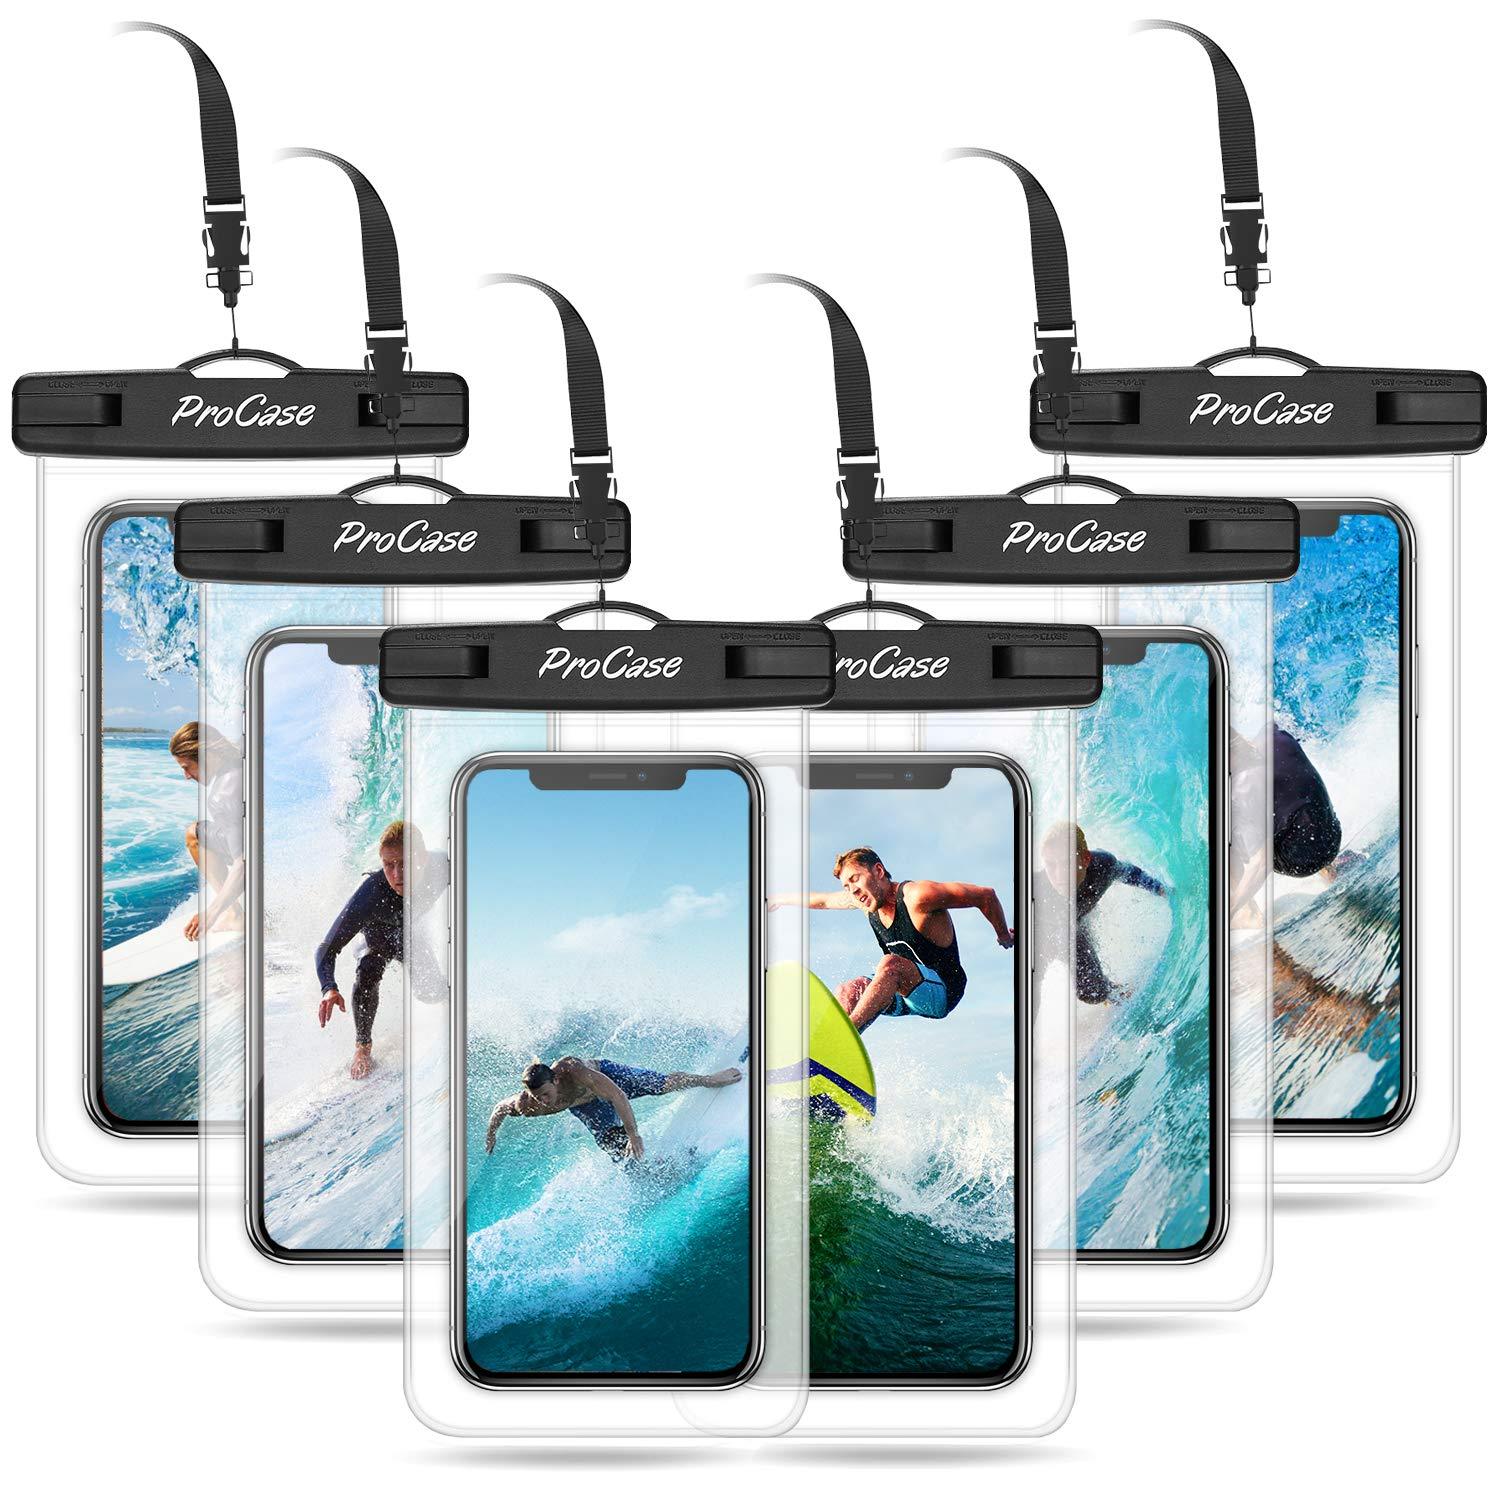 Universal Waterproof Pouch Phone Dry Bag - 6 Pack